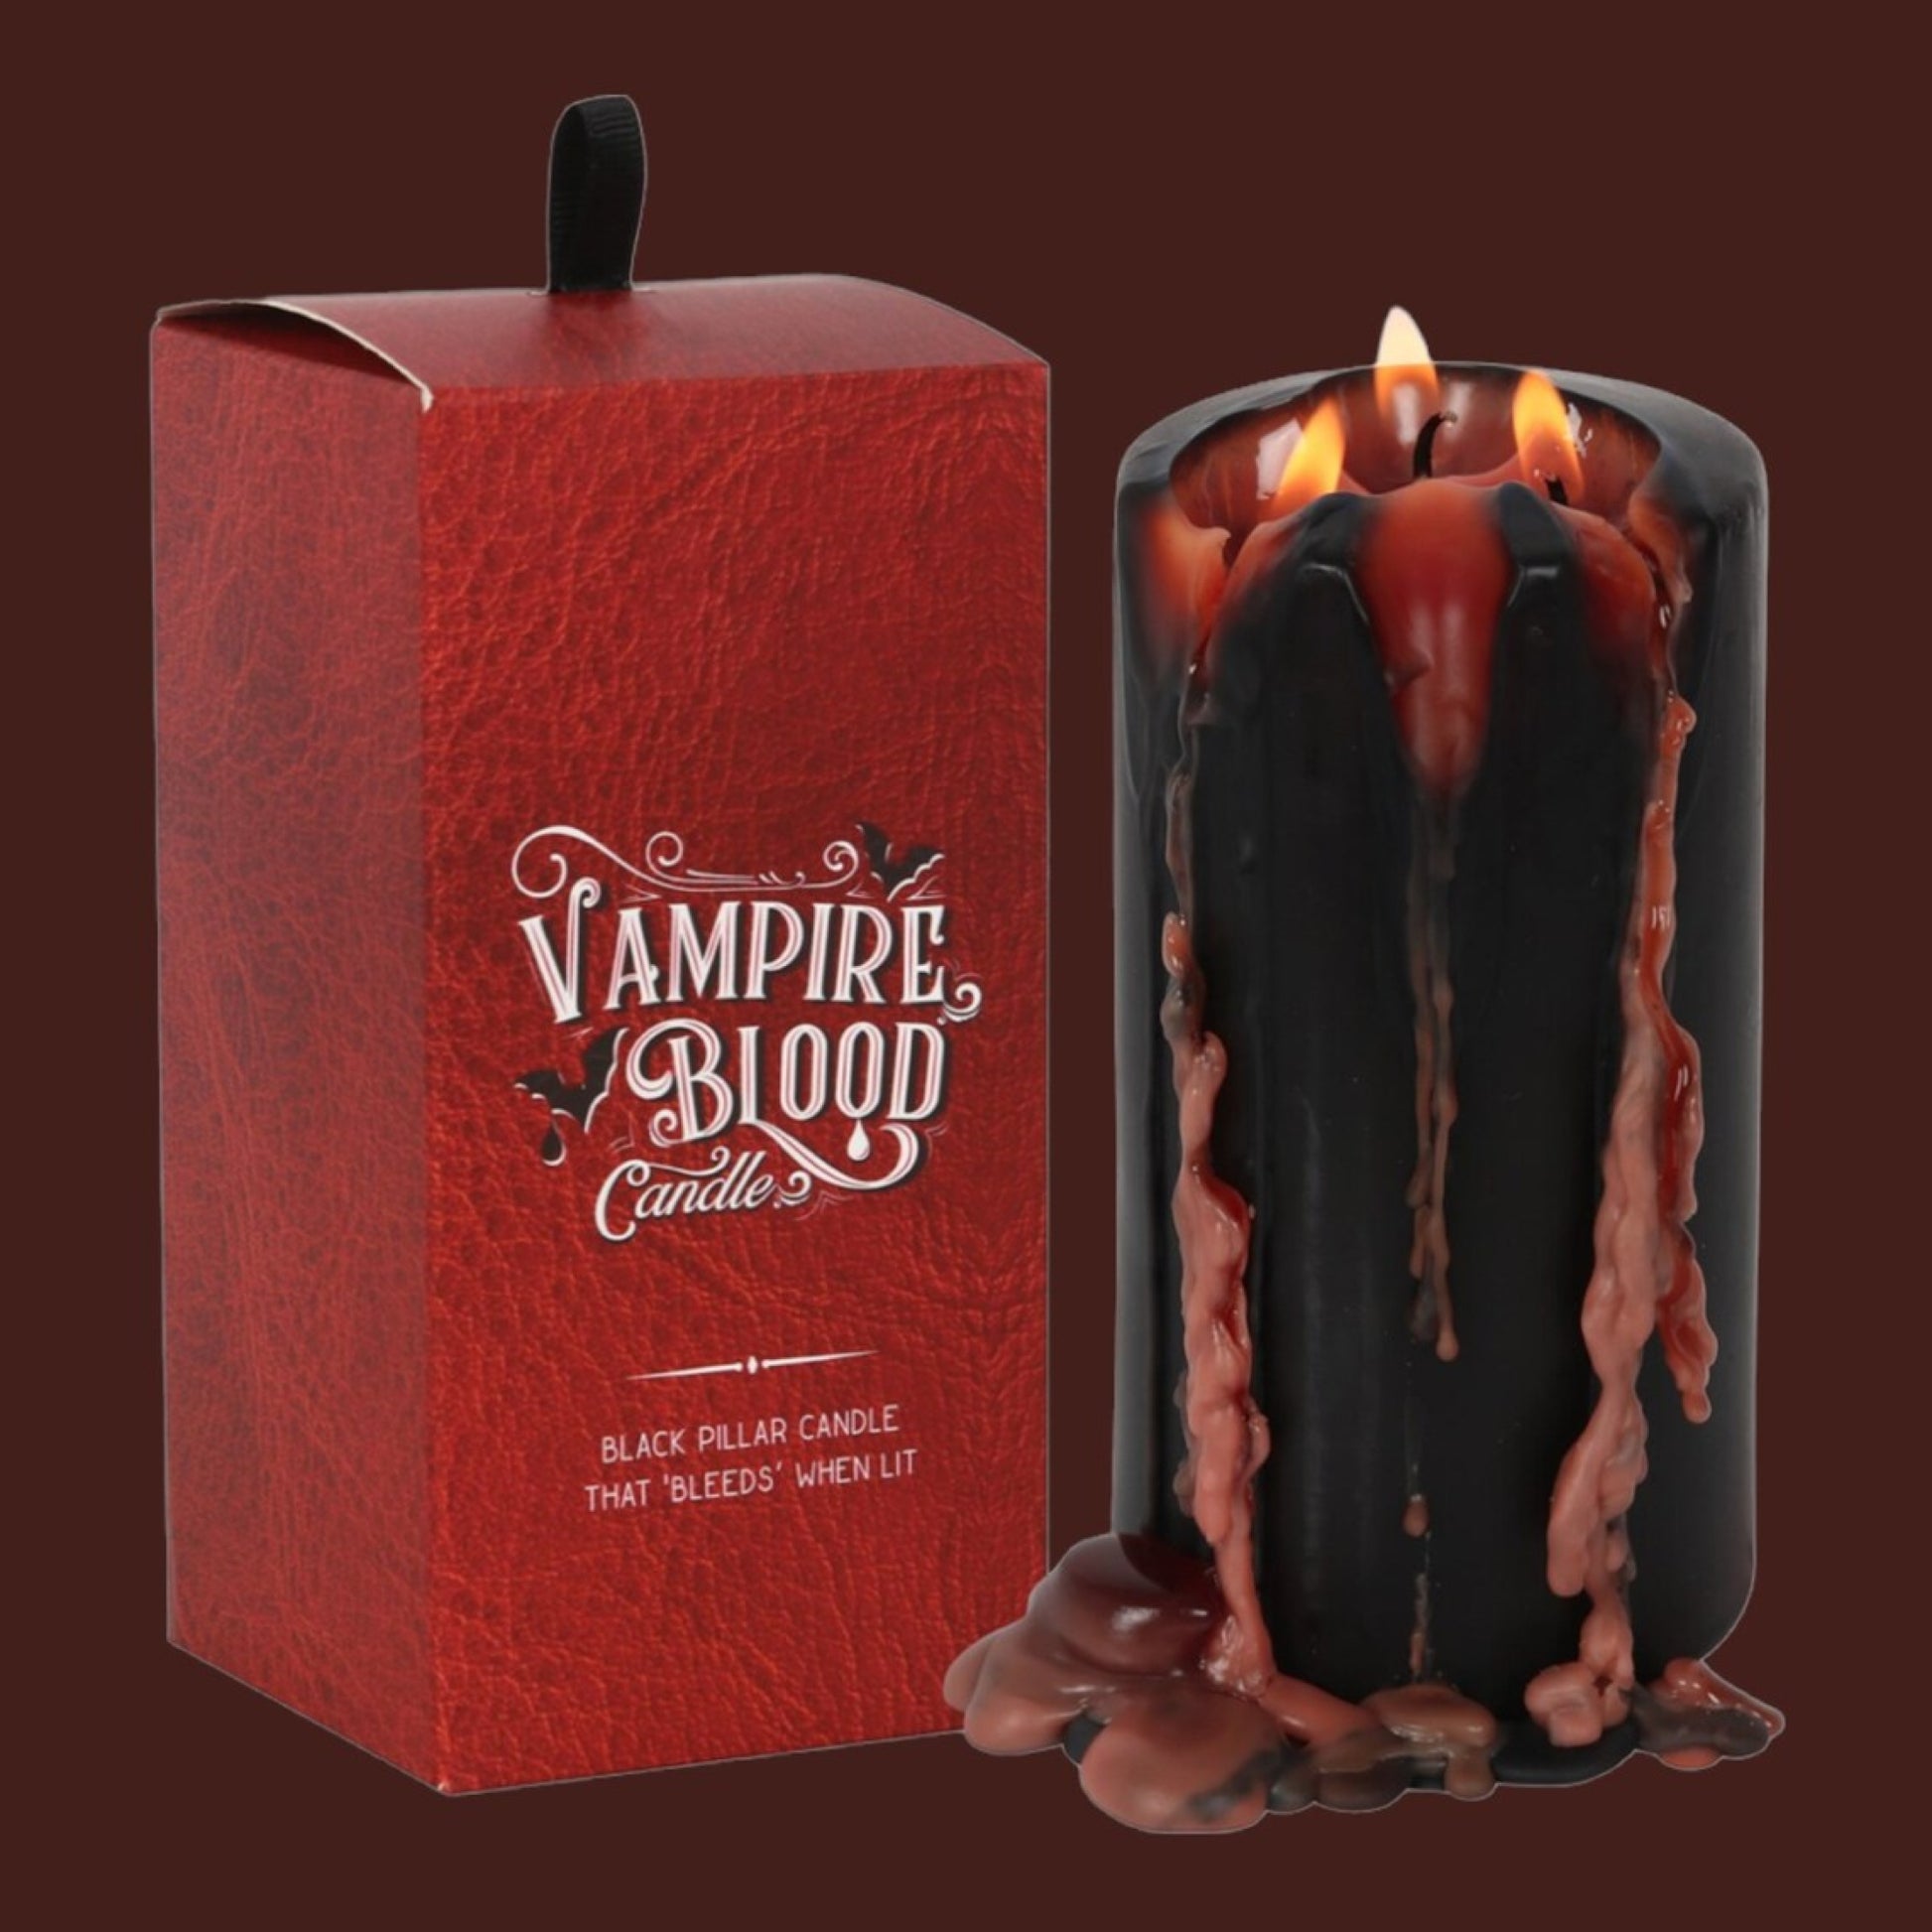 From candlelit dinners to eerie mood lighting, our large Vampire Blood pillar candle will entrance guests with its eye catching, bleeding wax effect. Place this unique candle on an ornate pedestal holder for a truly bewitching display when the warm wax bleeds down its sides. Size: H: 15.2cm x W: 7.5cm x D: 7.5cm Approximately 7 hour total burn time.